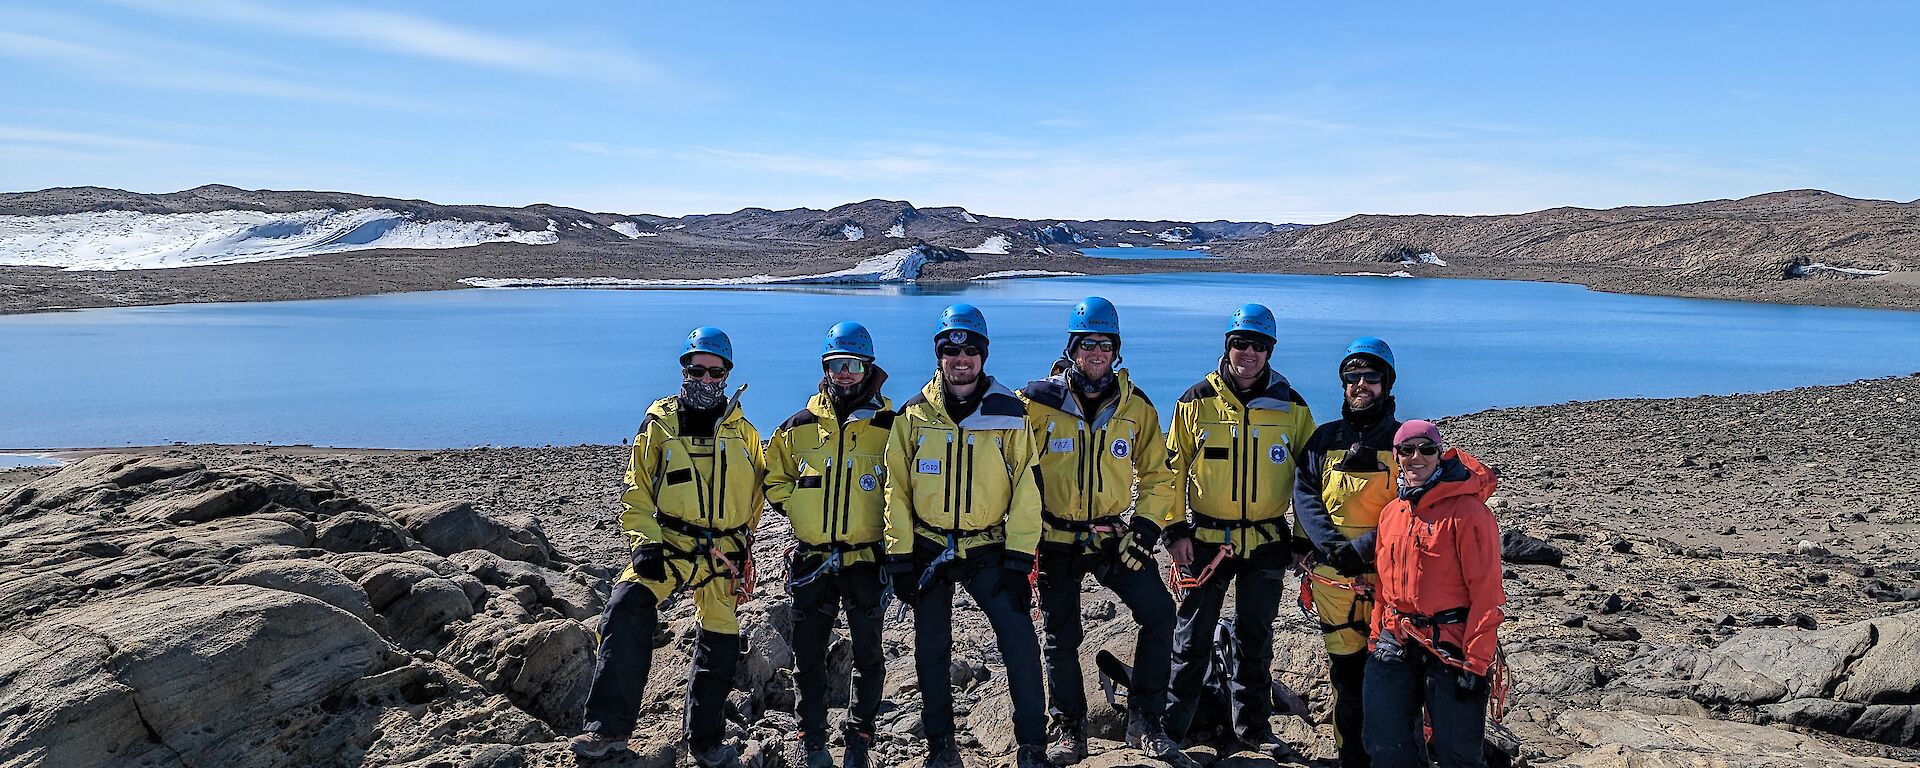 A group of six smiling men wearing yellow jackets and blue helmets and one smiling woman wearing an orange jacket all stand together on a rocky outcrop with a blue lake in the distant background.